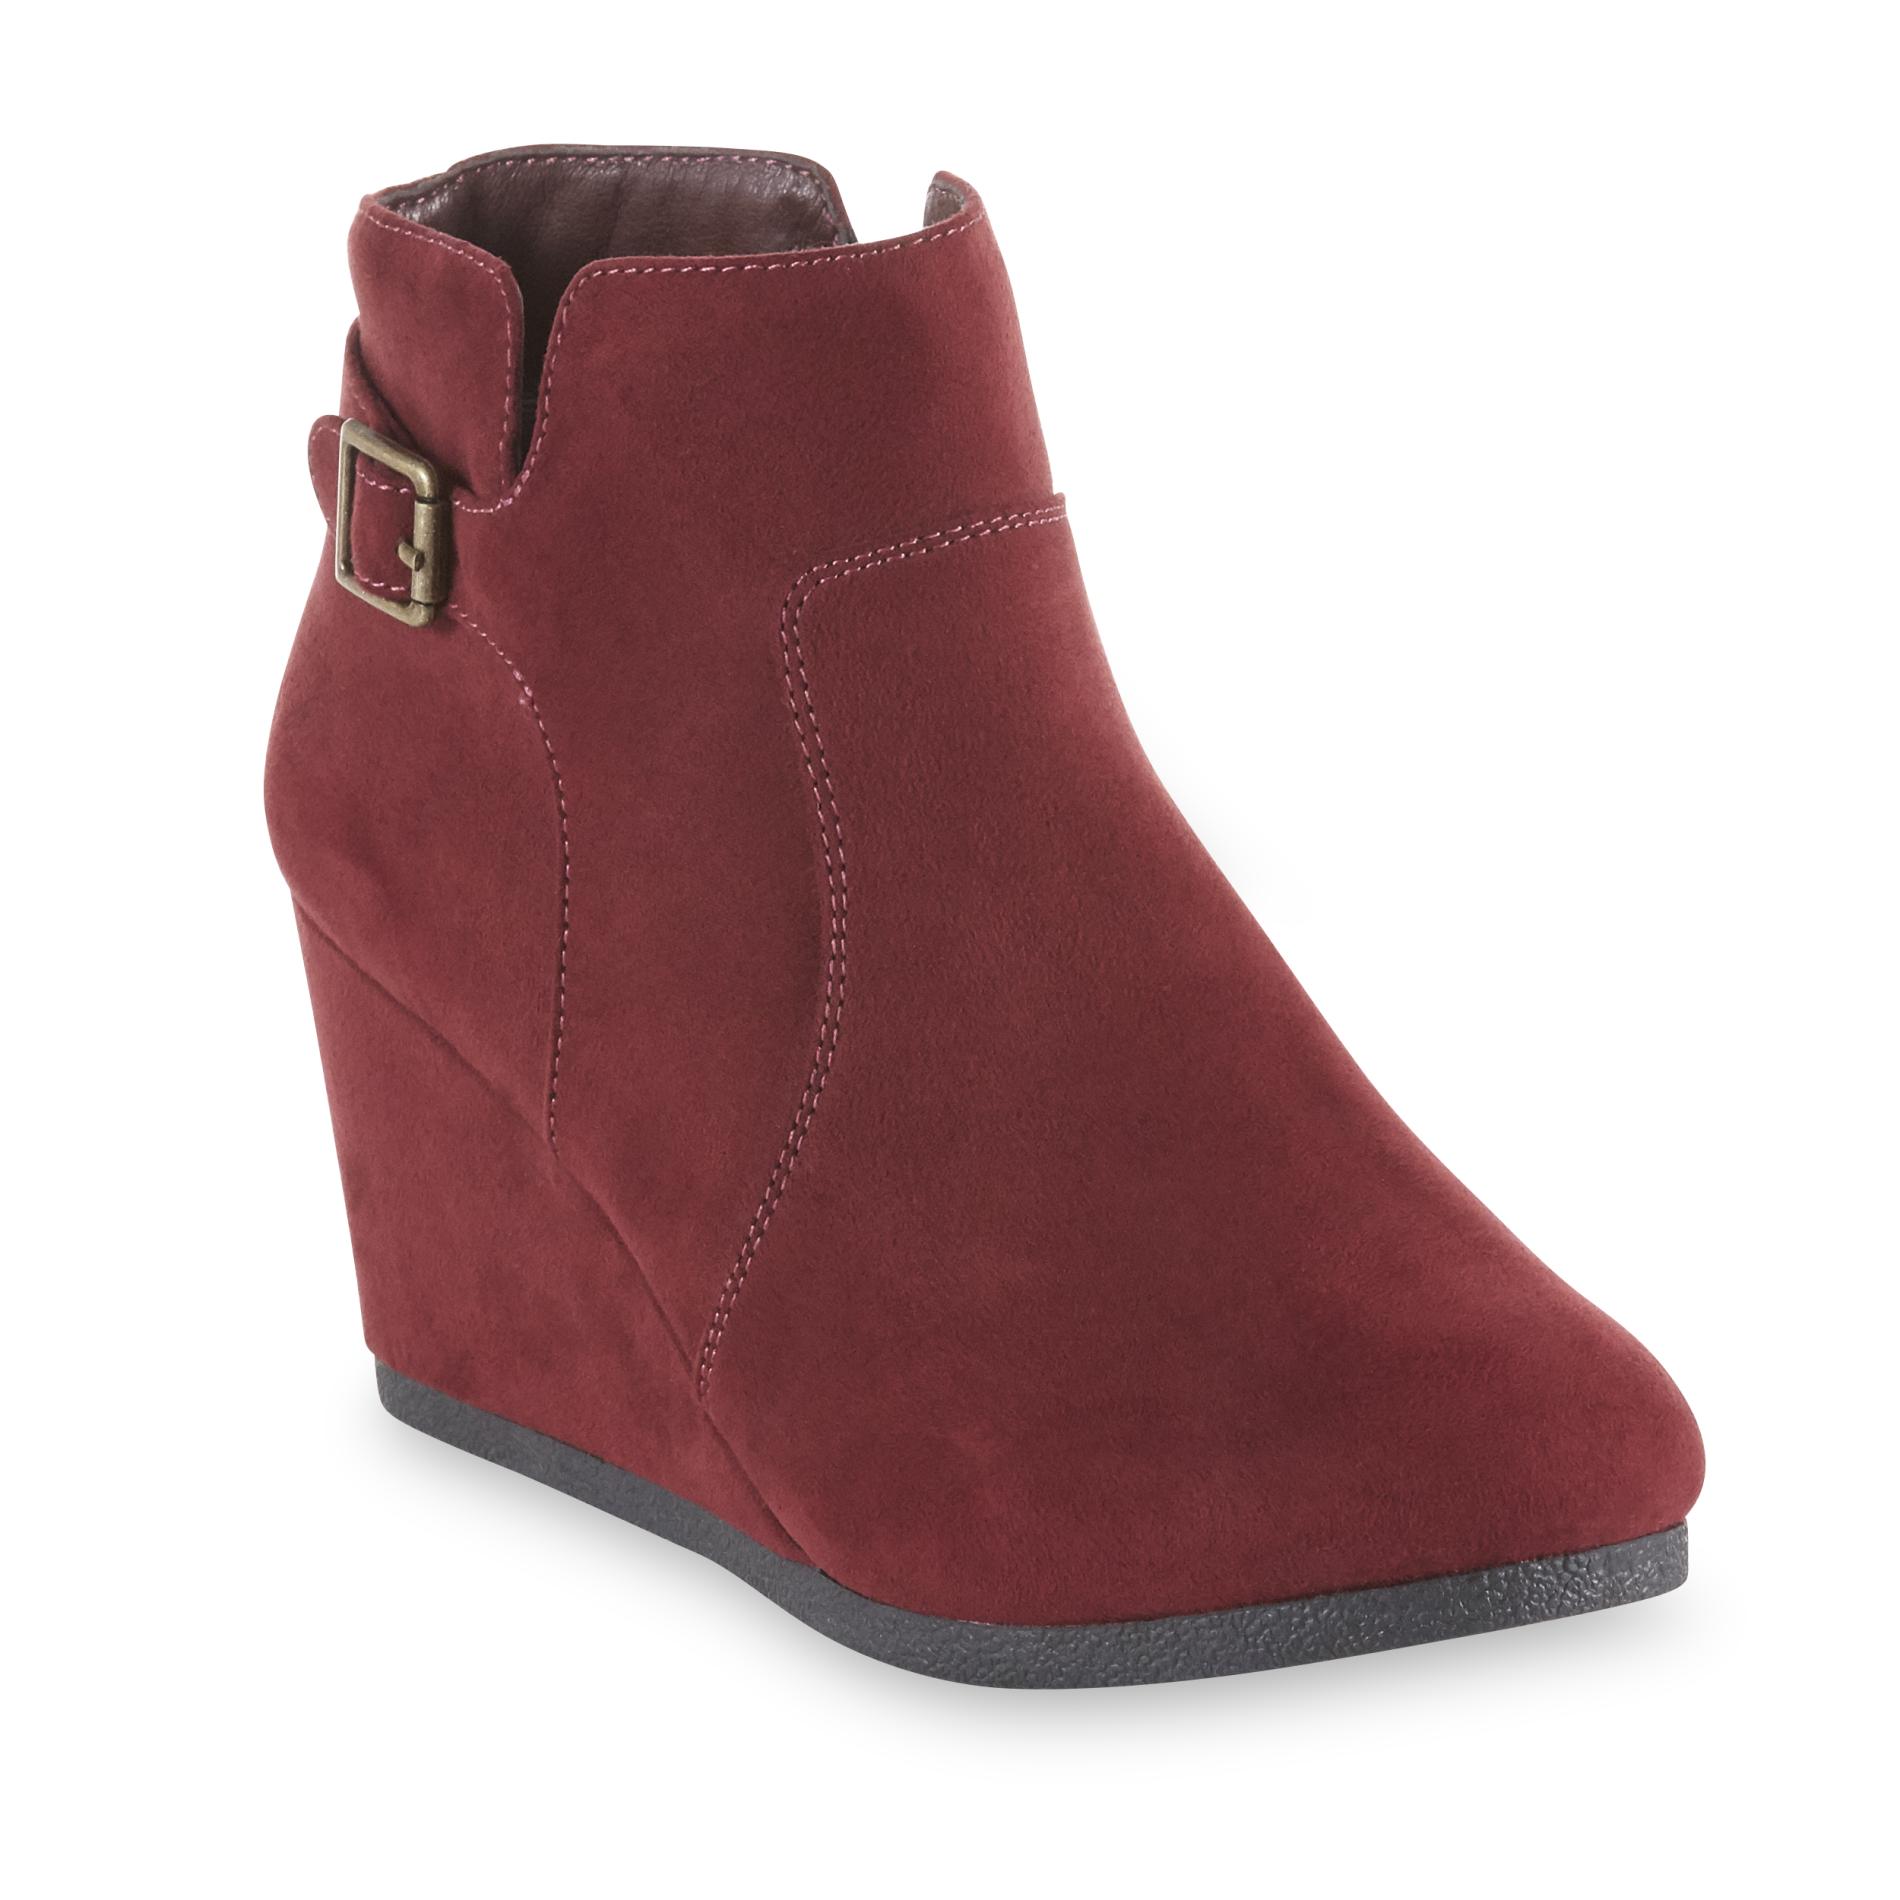 attention wedge booties